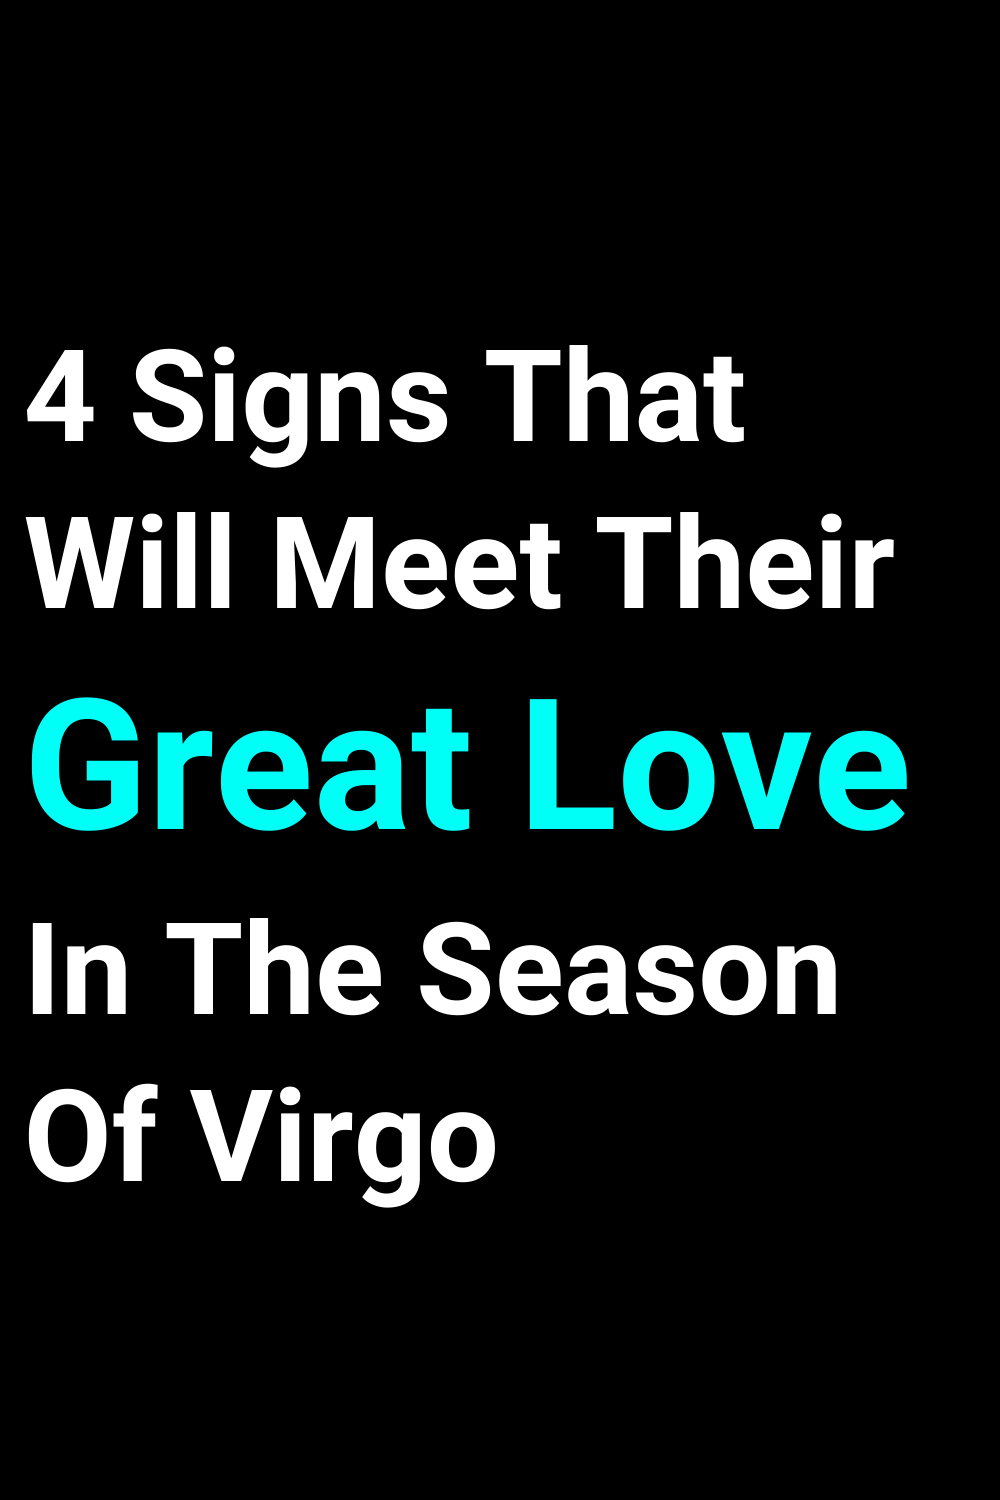 4 Signs That Will Meet Their Great Love In The Season Of Virgo